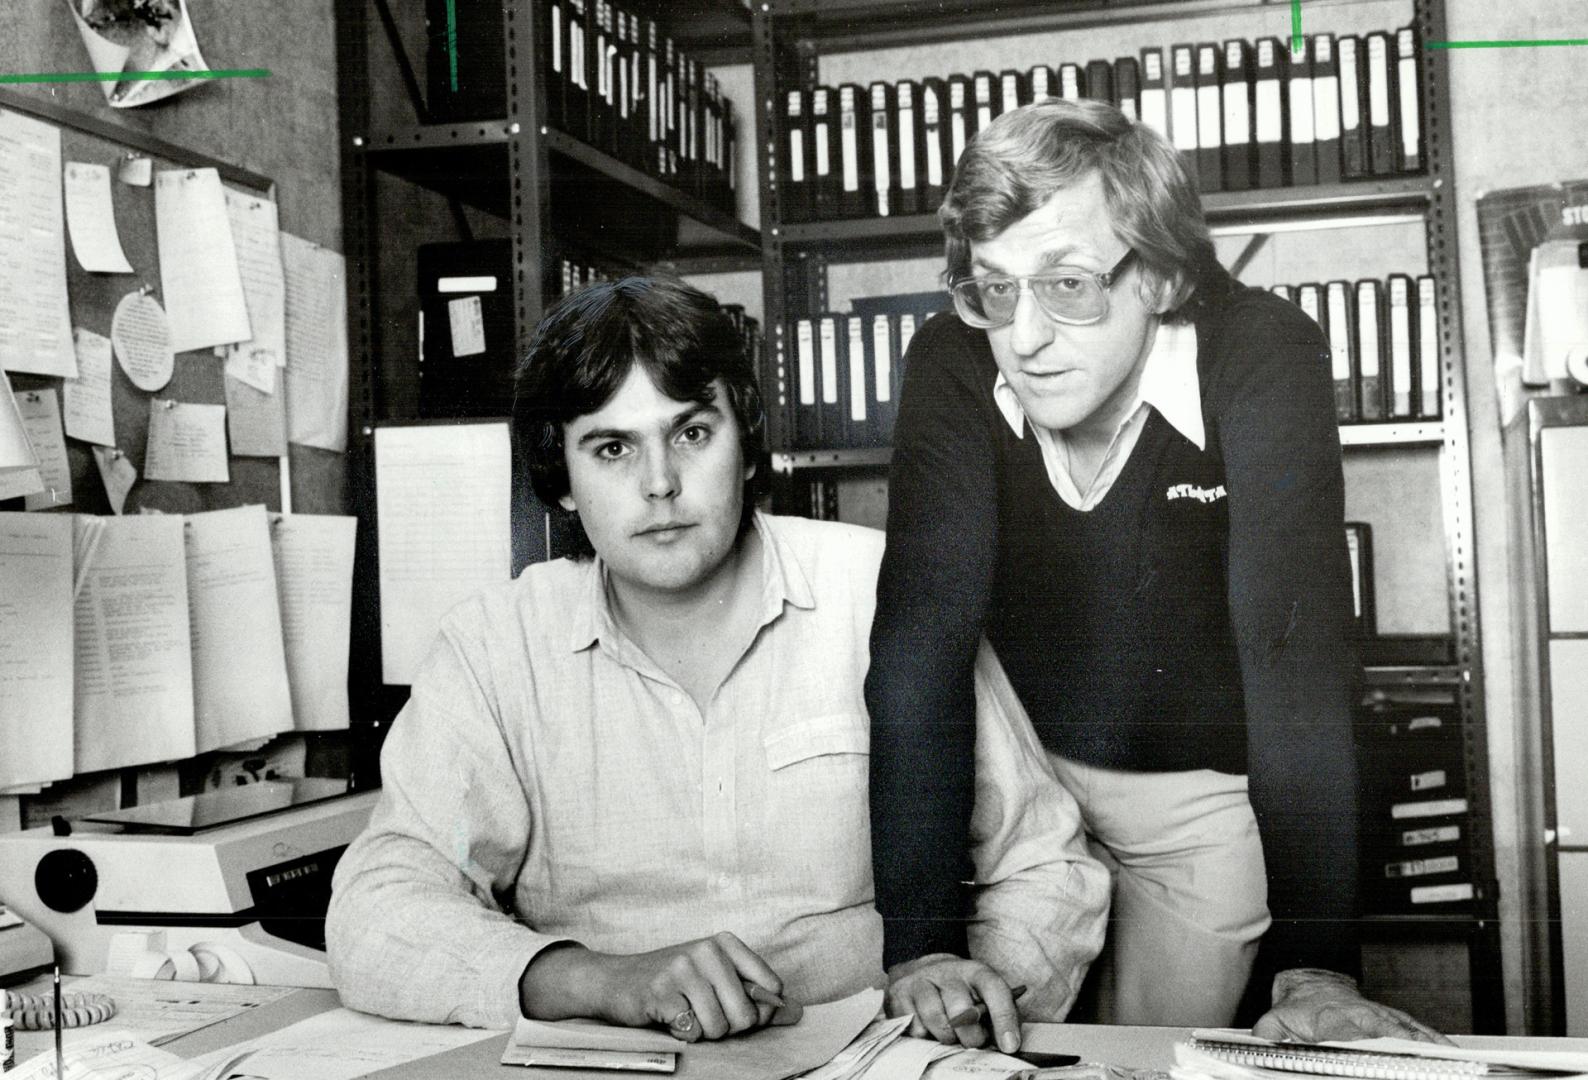 Back home safely: David Studer (left), a CBC reporter, and John Scully, a producer, are back in the safety of the CBC Newmagazine studios after facing soldiers's guns on assignment in EI Salvador